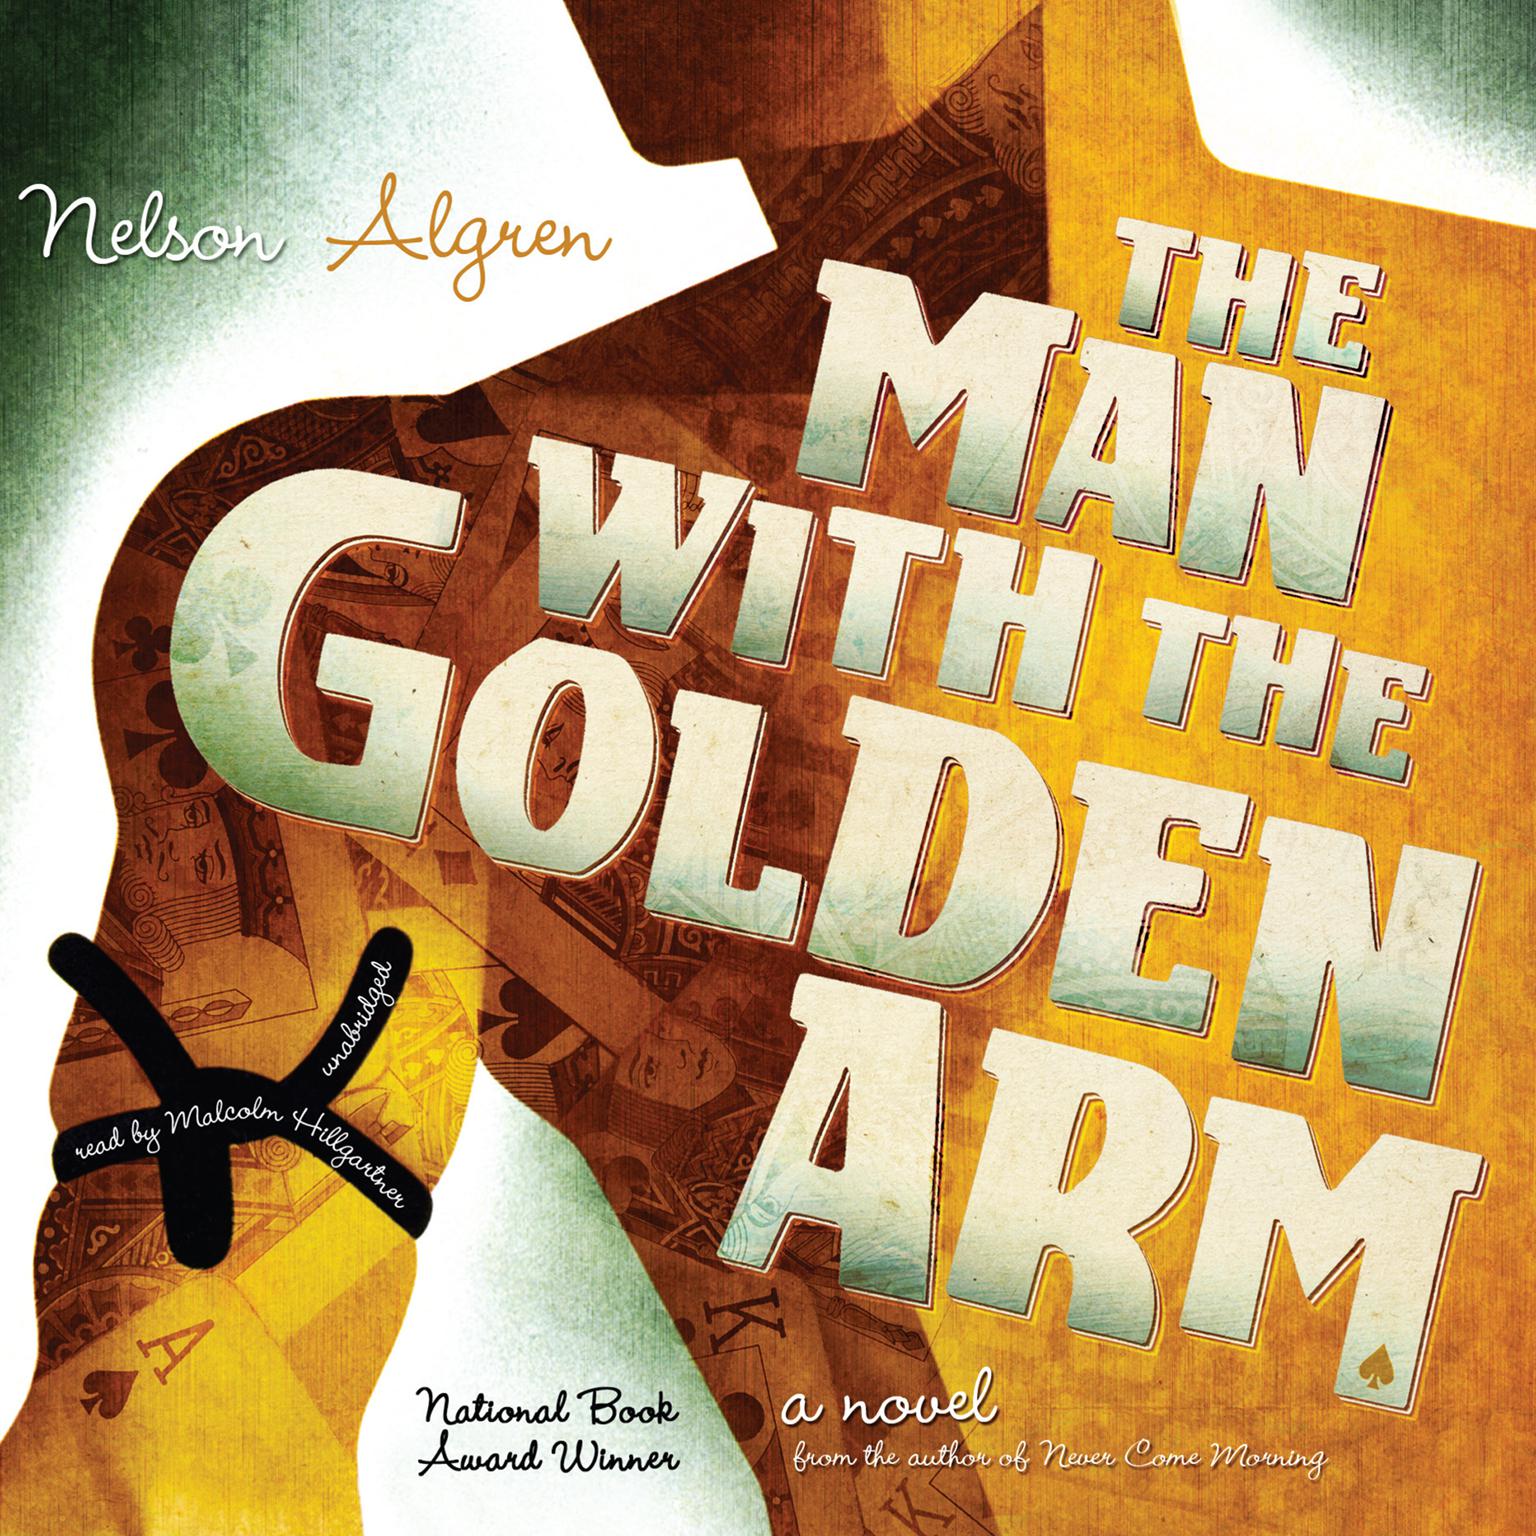 The Man with the Golden Arm Audiobook, by Nelson Algren